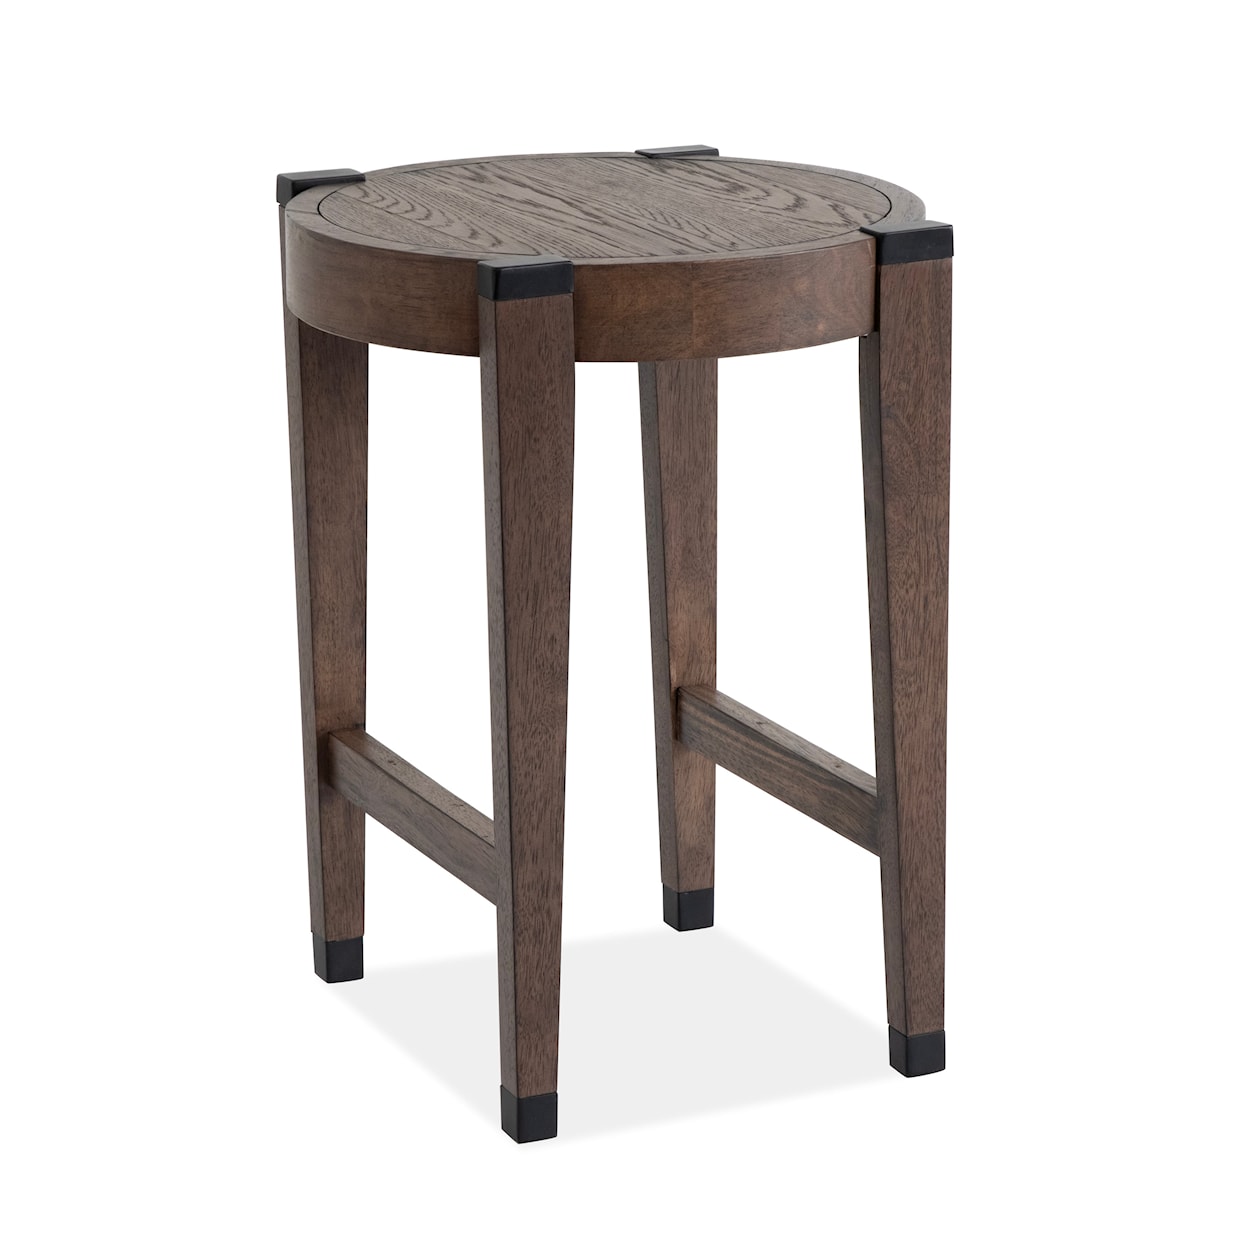 Magnussen Home Kaysen Tables Round End Table